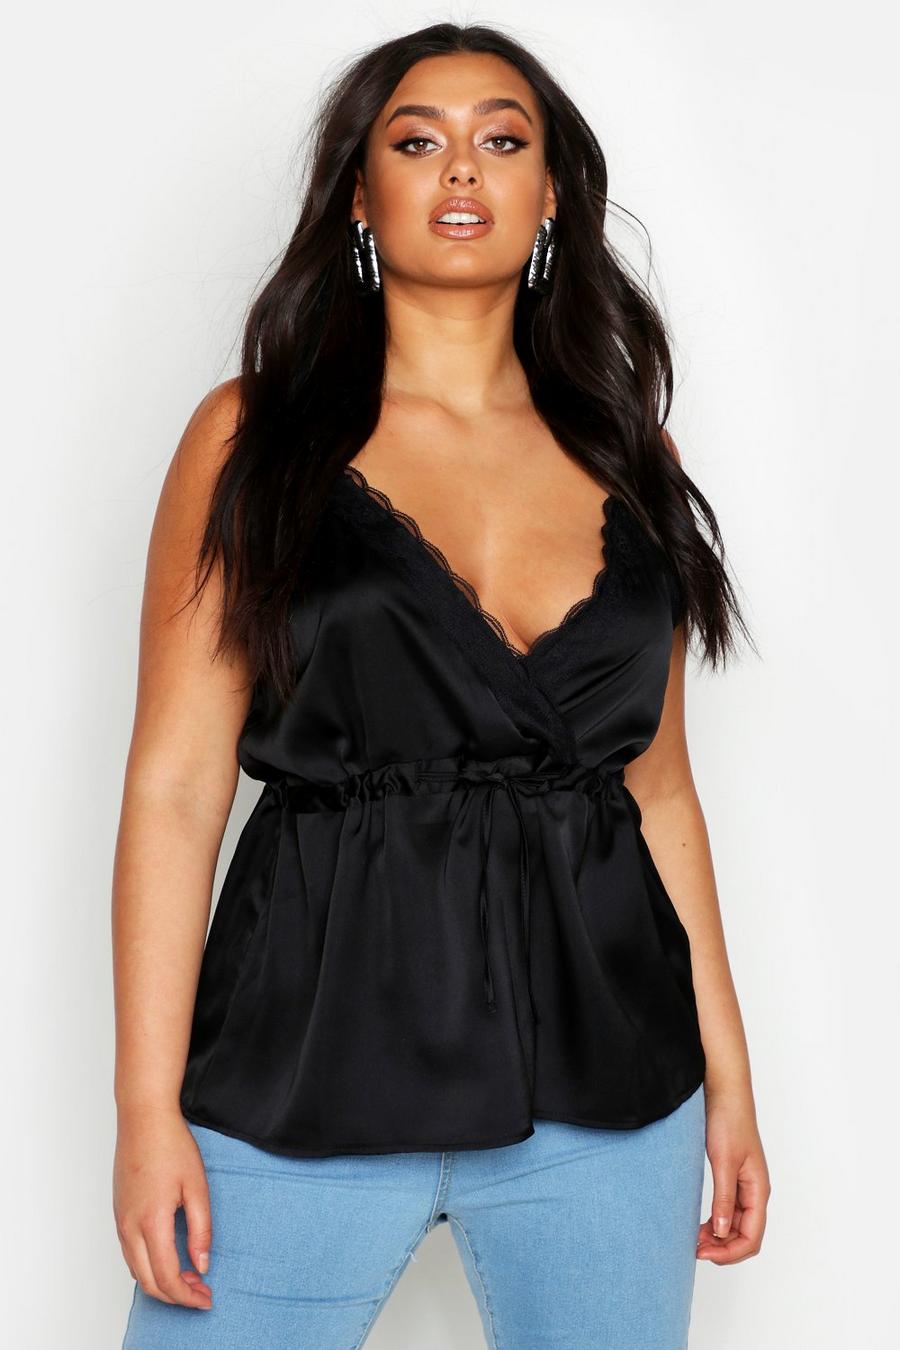 Going Out Tops | Party Tops & Evening Tops | boohoo UK